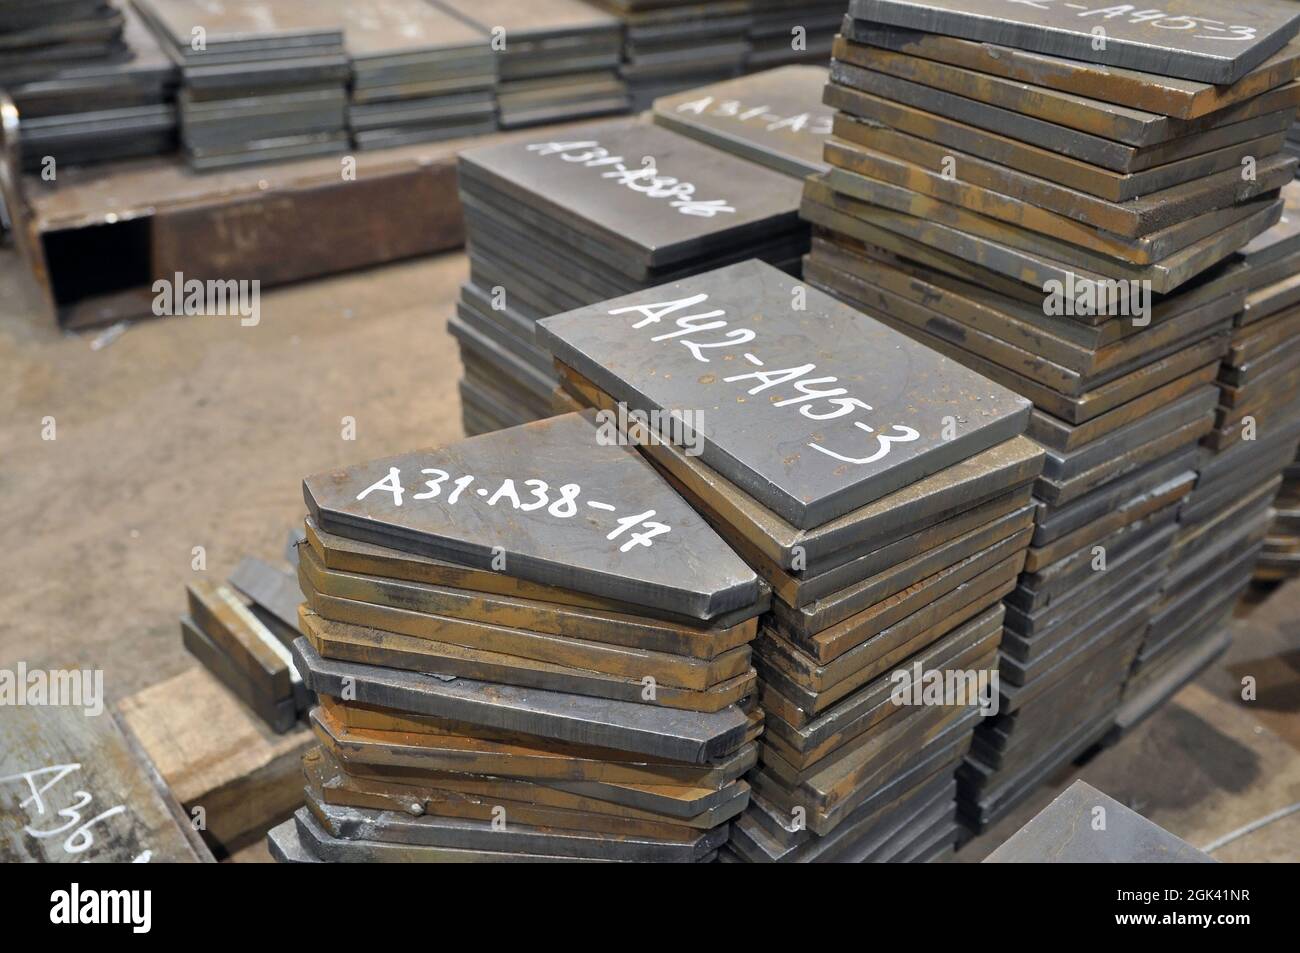 Metal cutting. Warehousing of finished parts with marking. Stock Photo